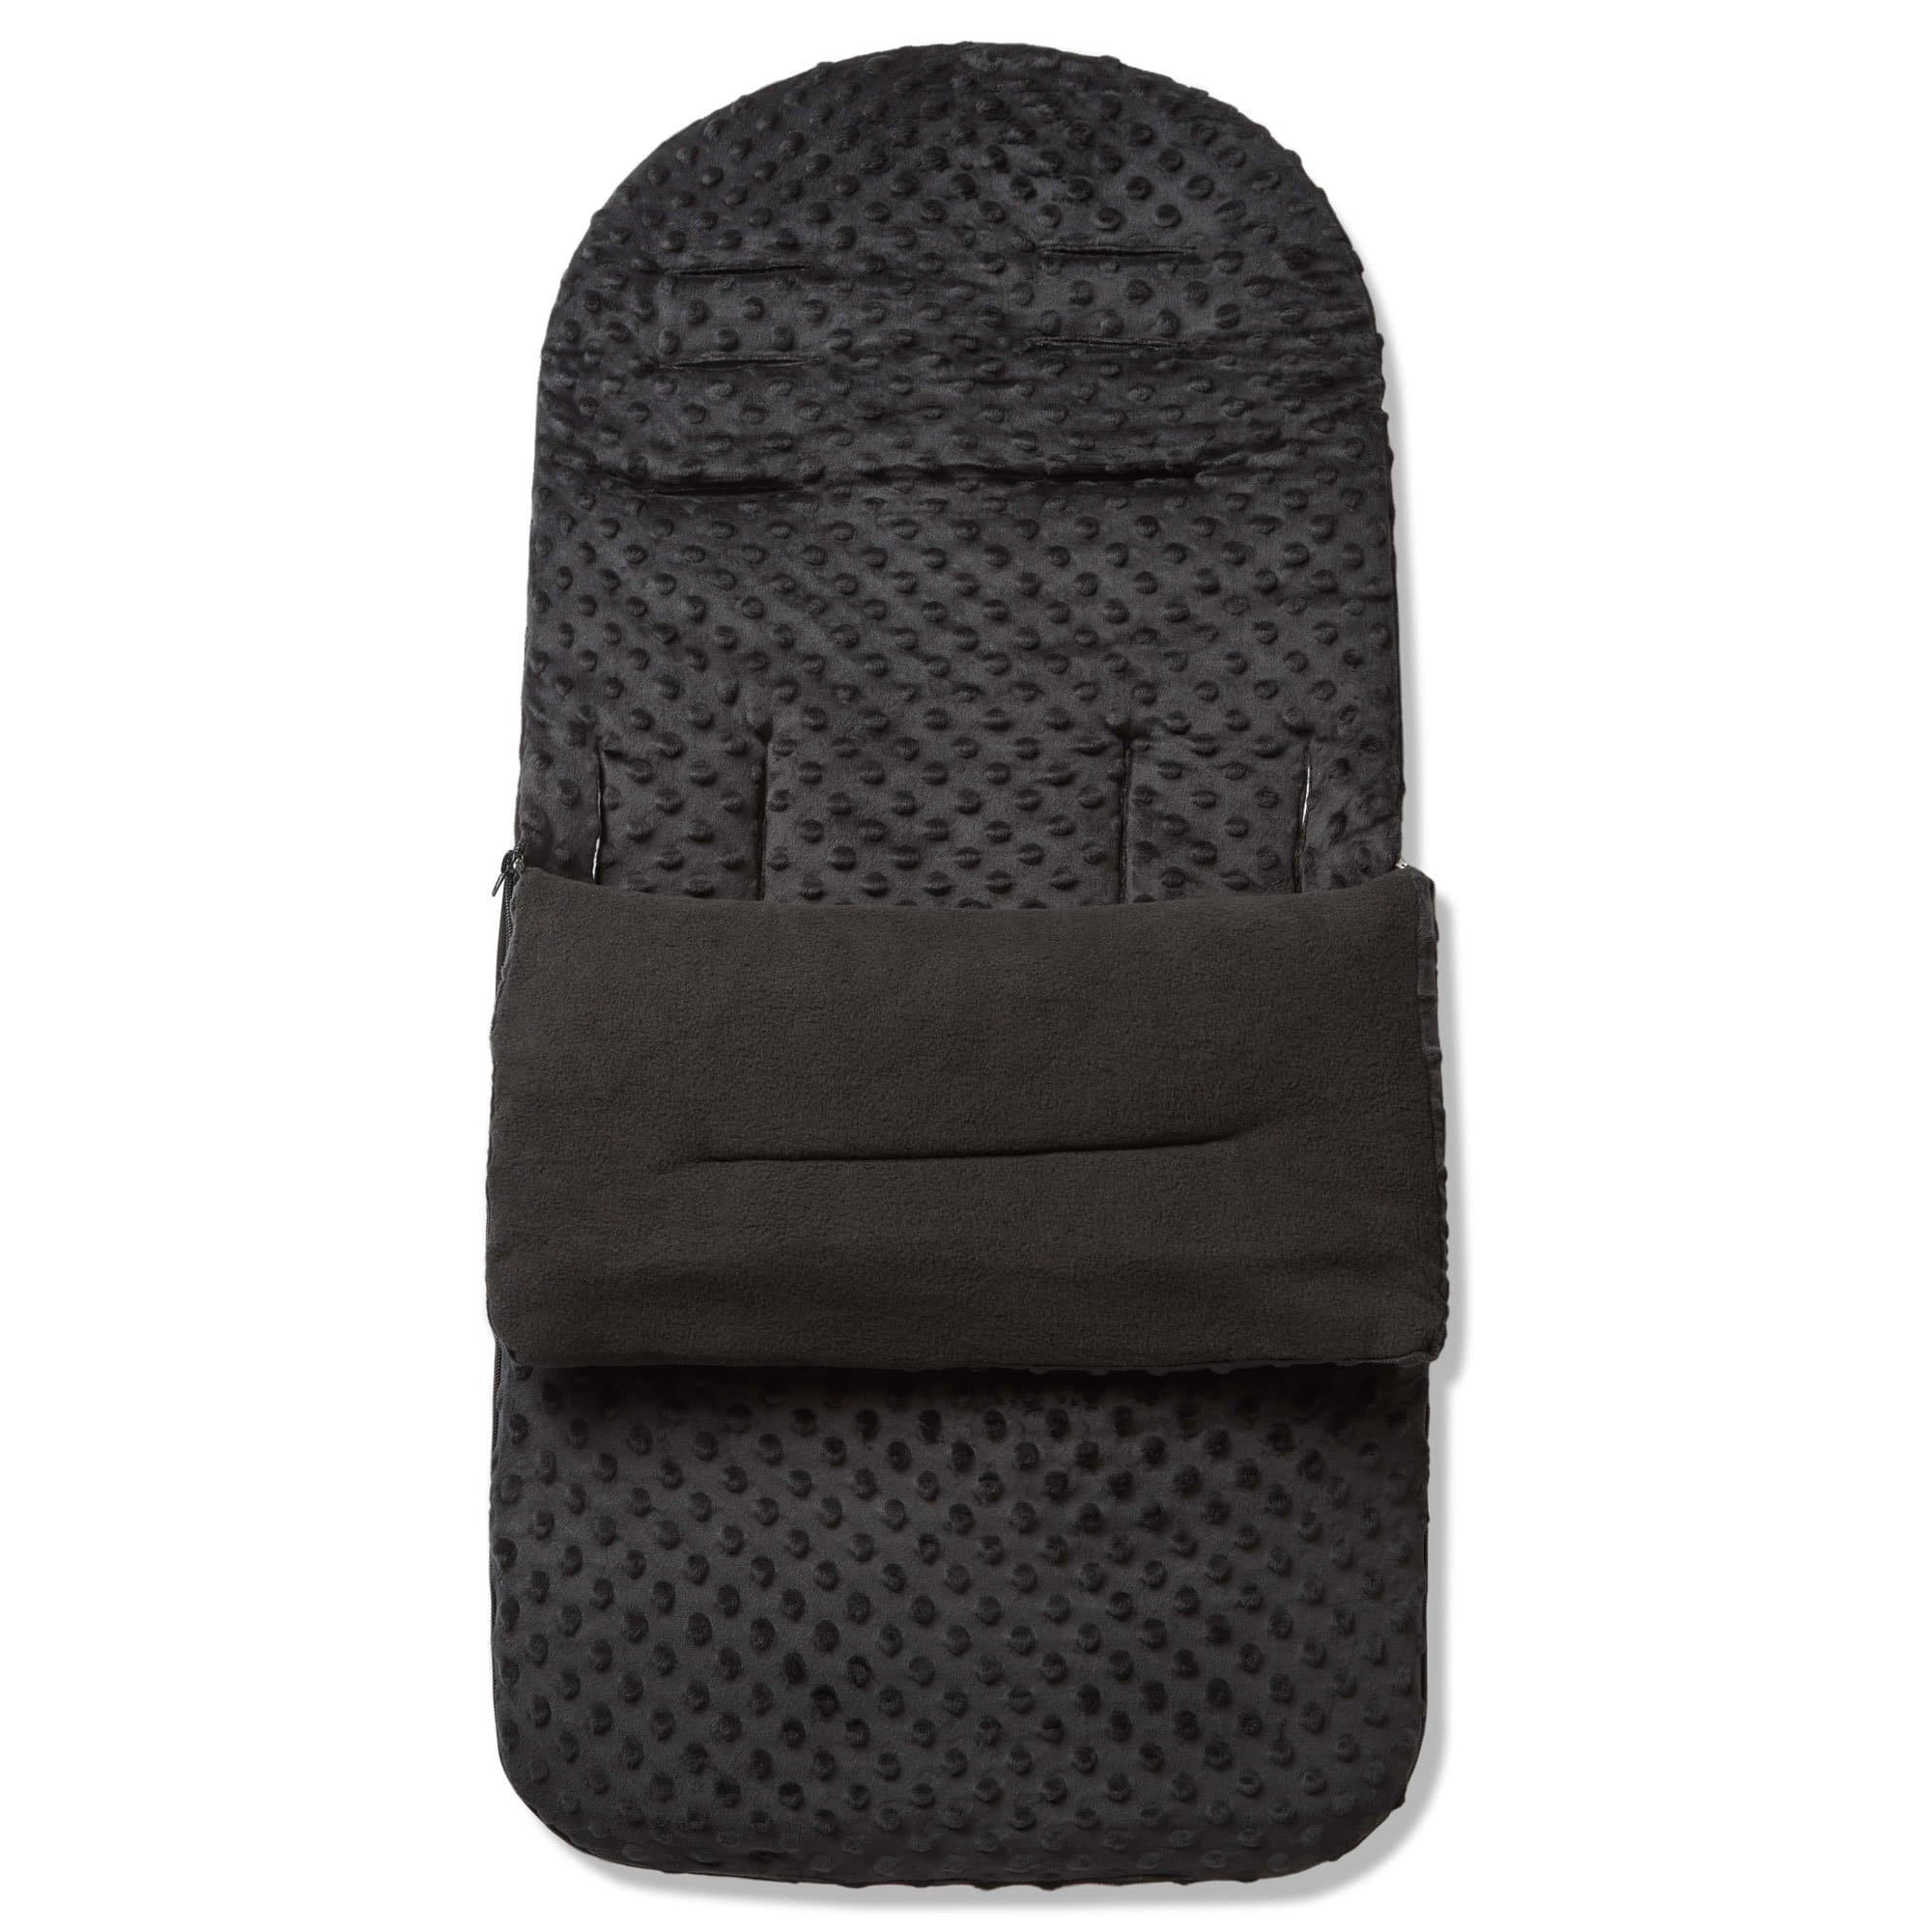 Dimple Footmuff / Cosy Toes Compatible with Britax - Black / Fits All Models | For Your Little One